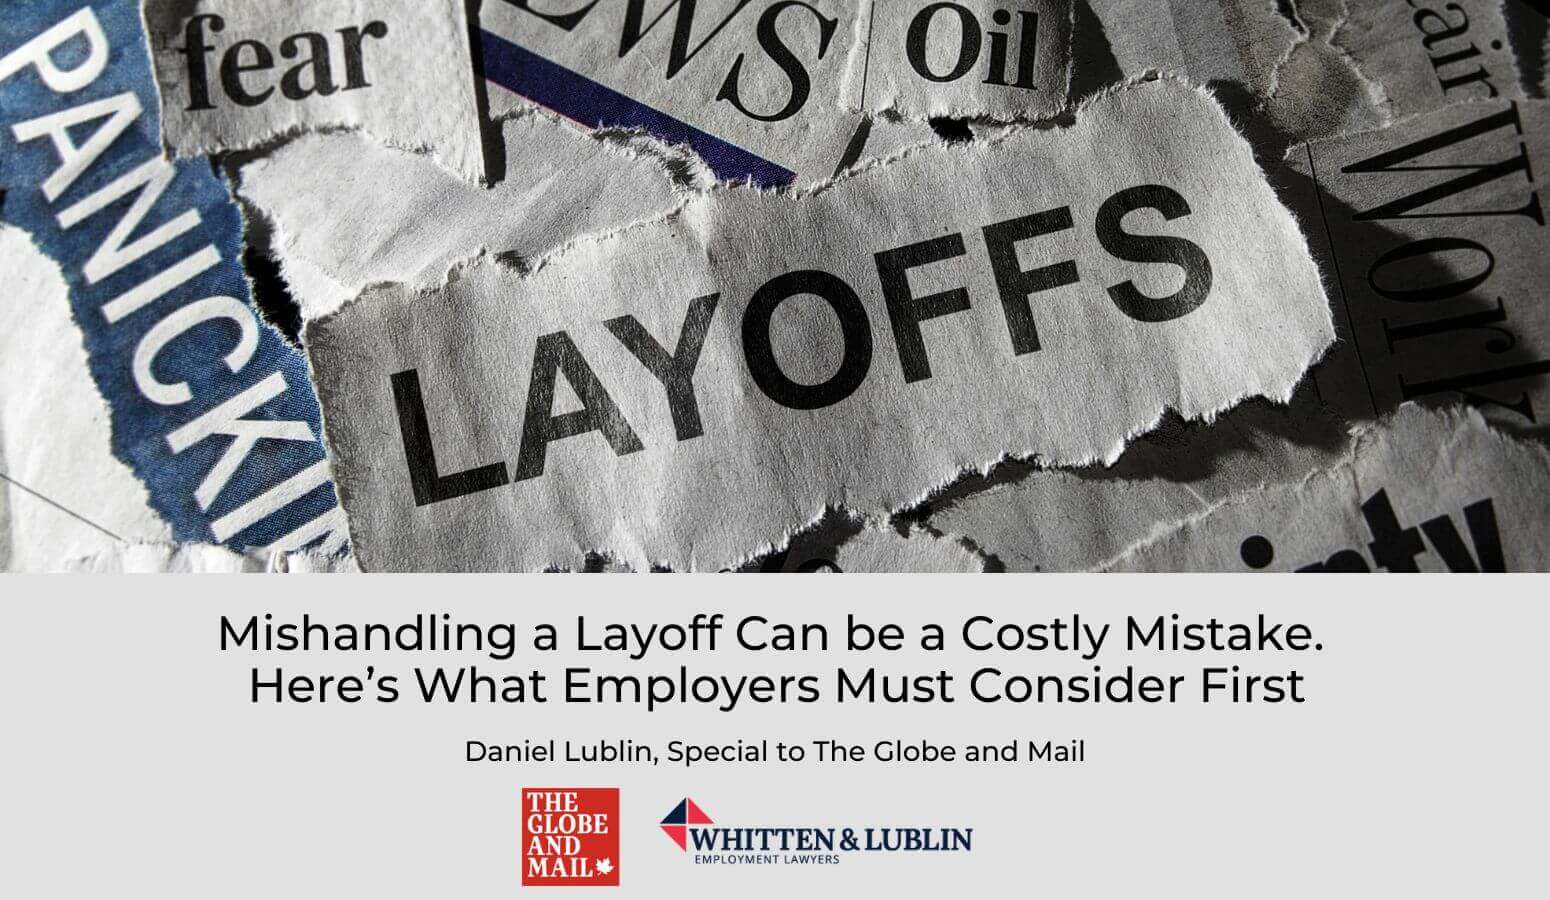 Featured image for “Mishandling a Layoff Can Be a Costly Mistake for Employers”